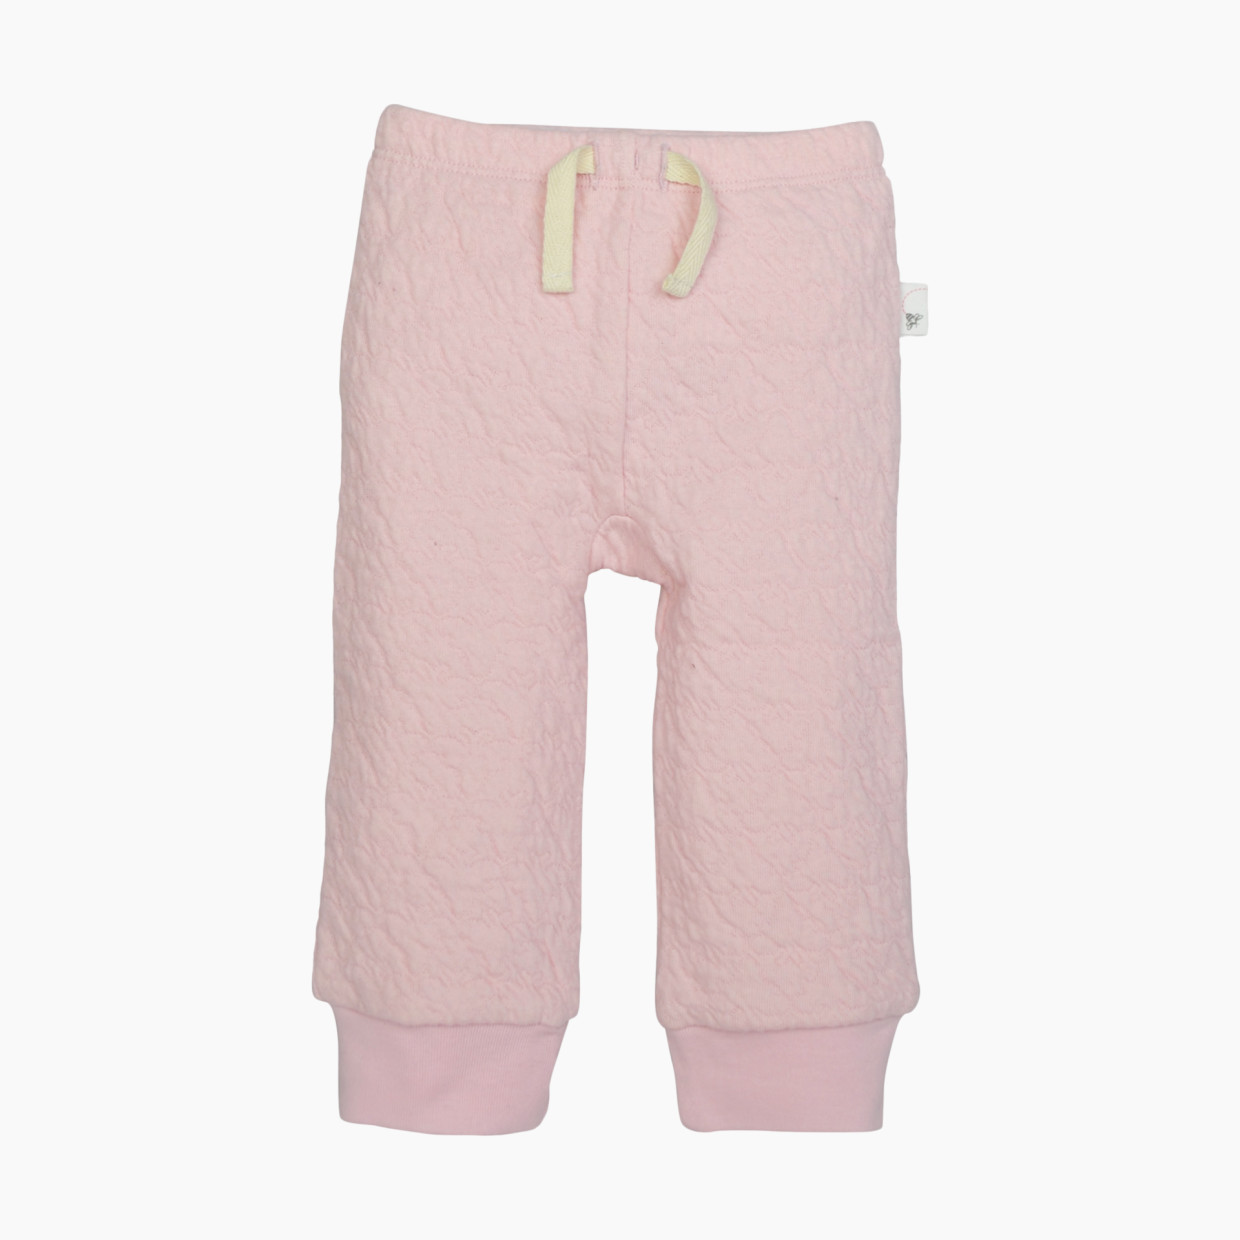 Burt's Bees Baby Organic Quilted Bee Pant - Blossom, 9-12 Months.